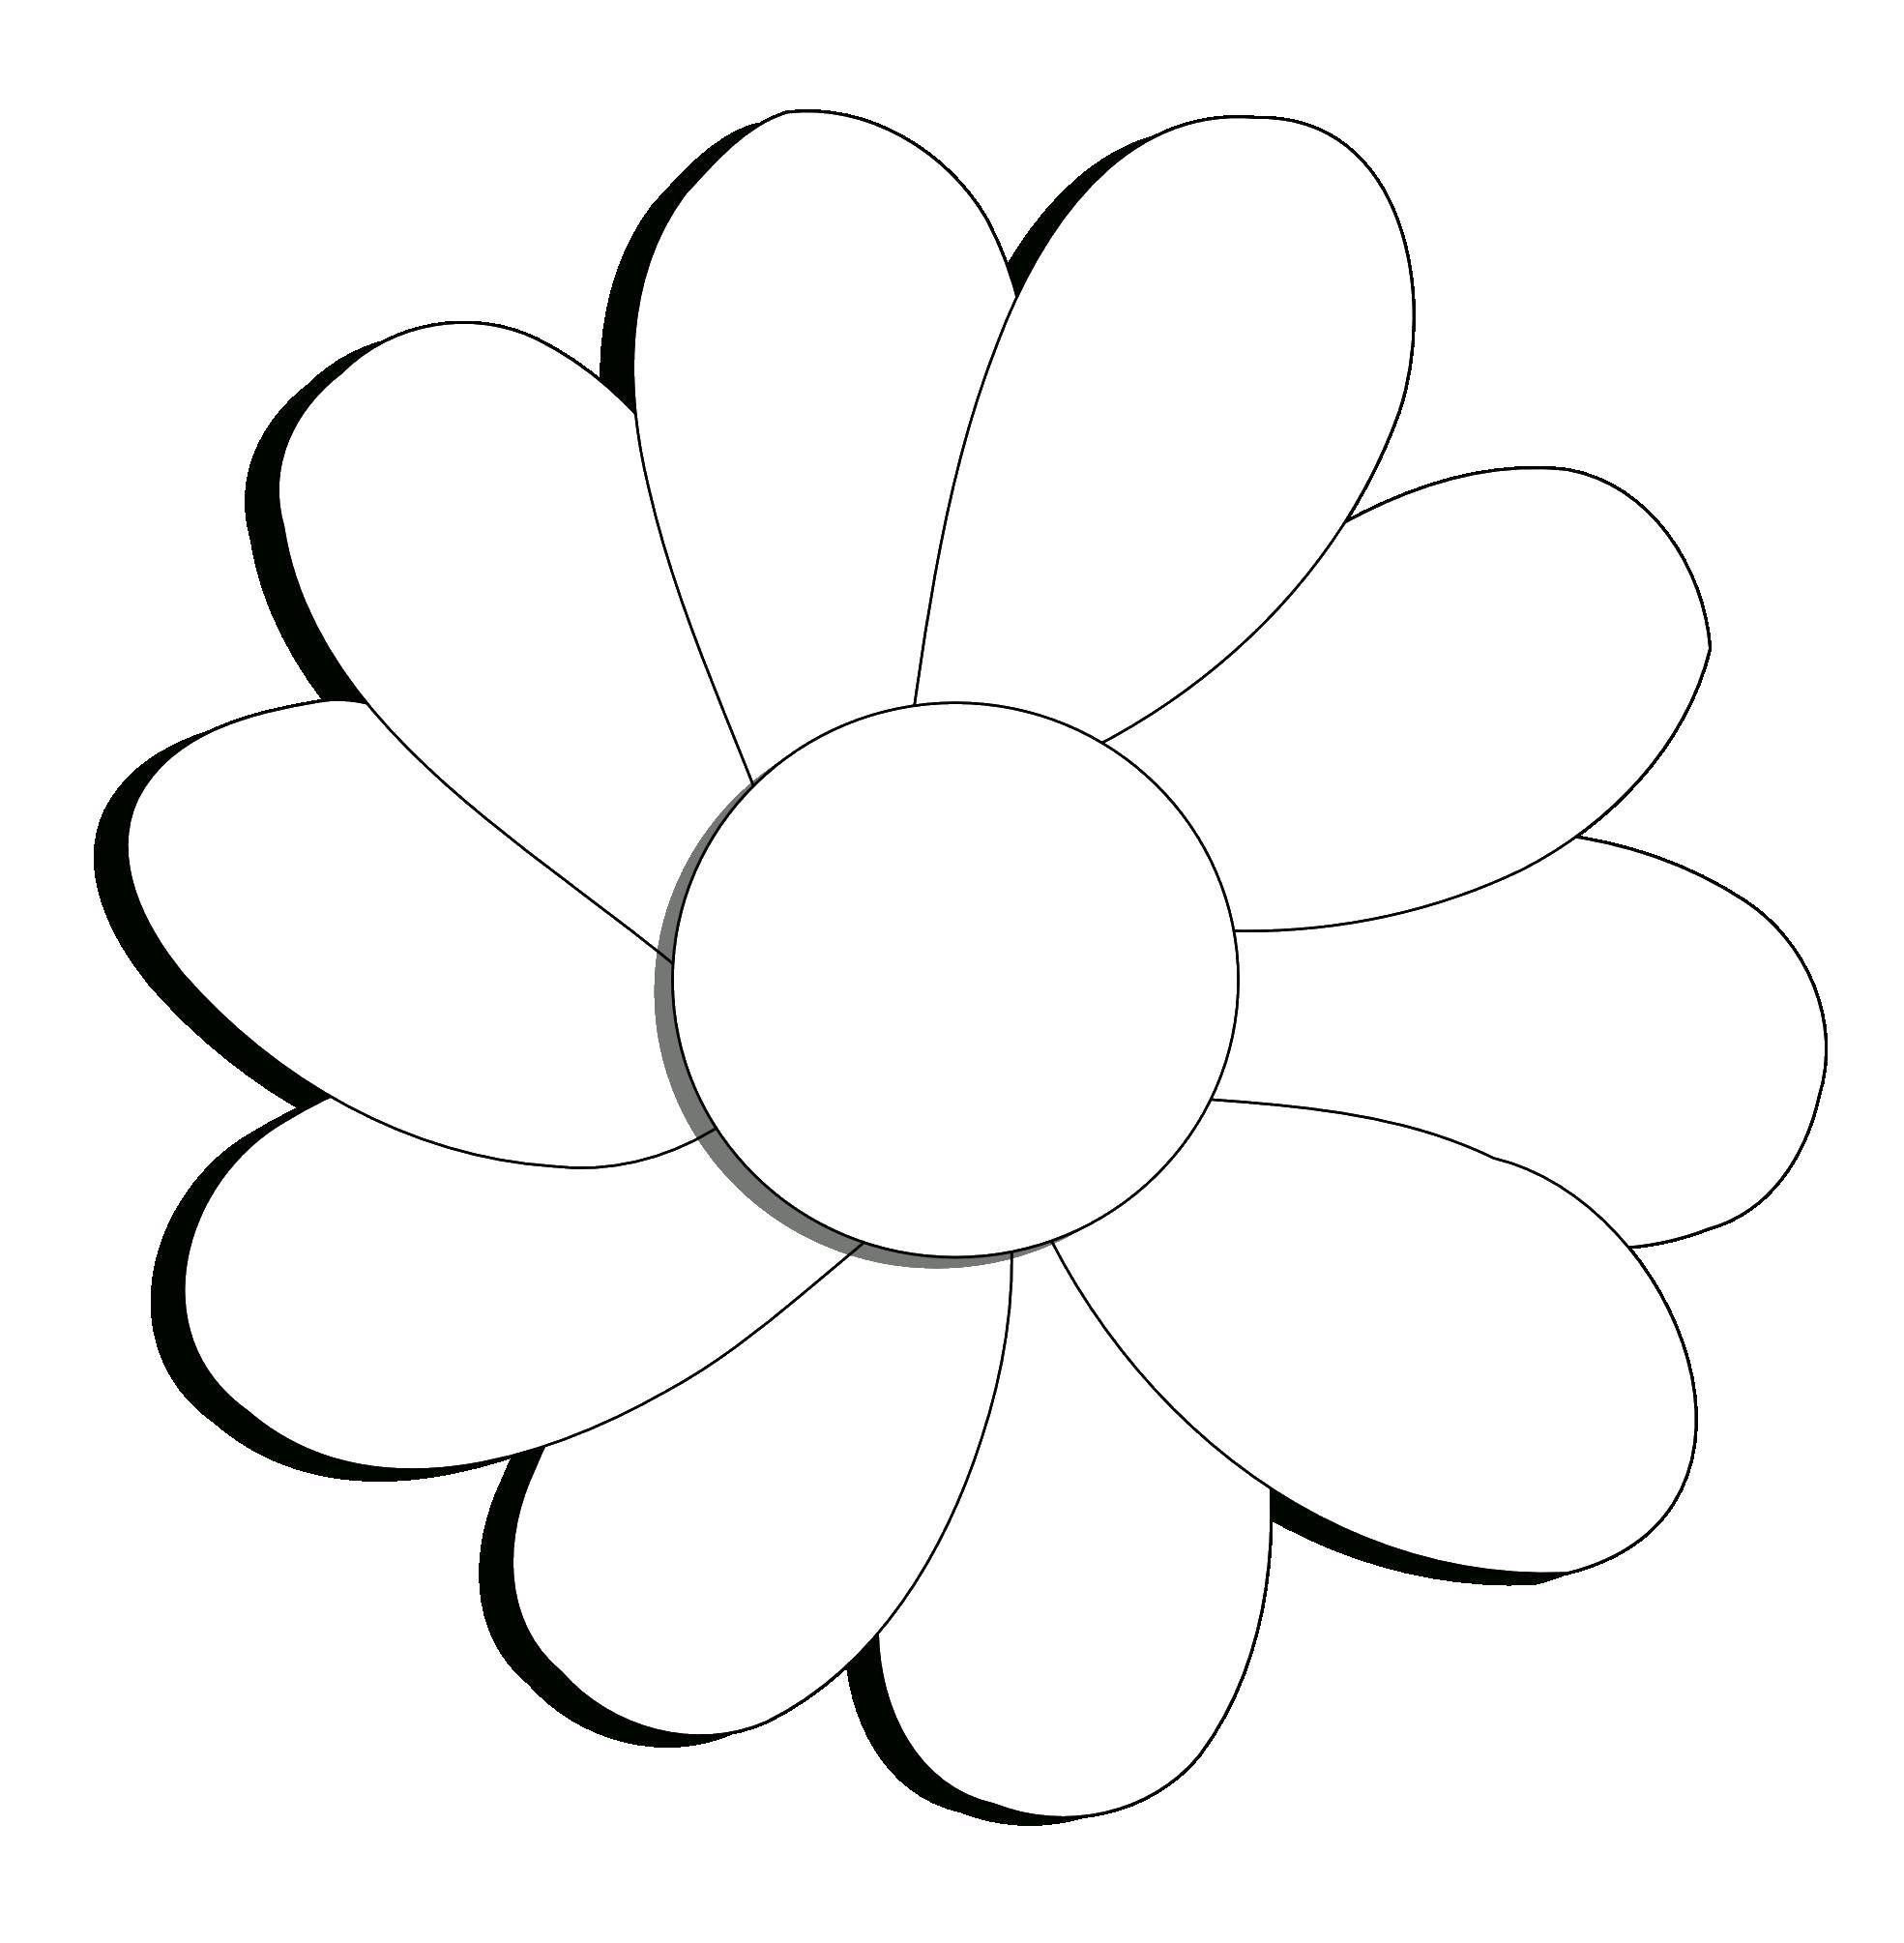 Coloring Pattern chamomile flower. Category The contours of the flower to cut. Tags:  contour, Daisy, petals.